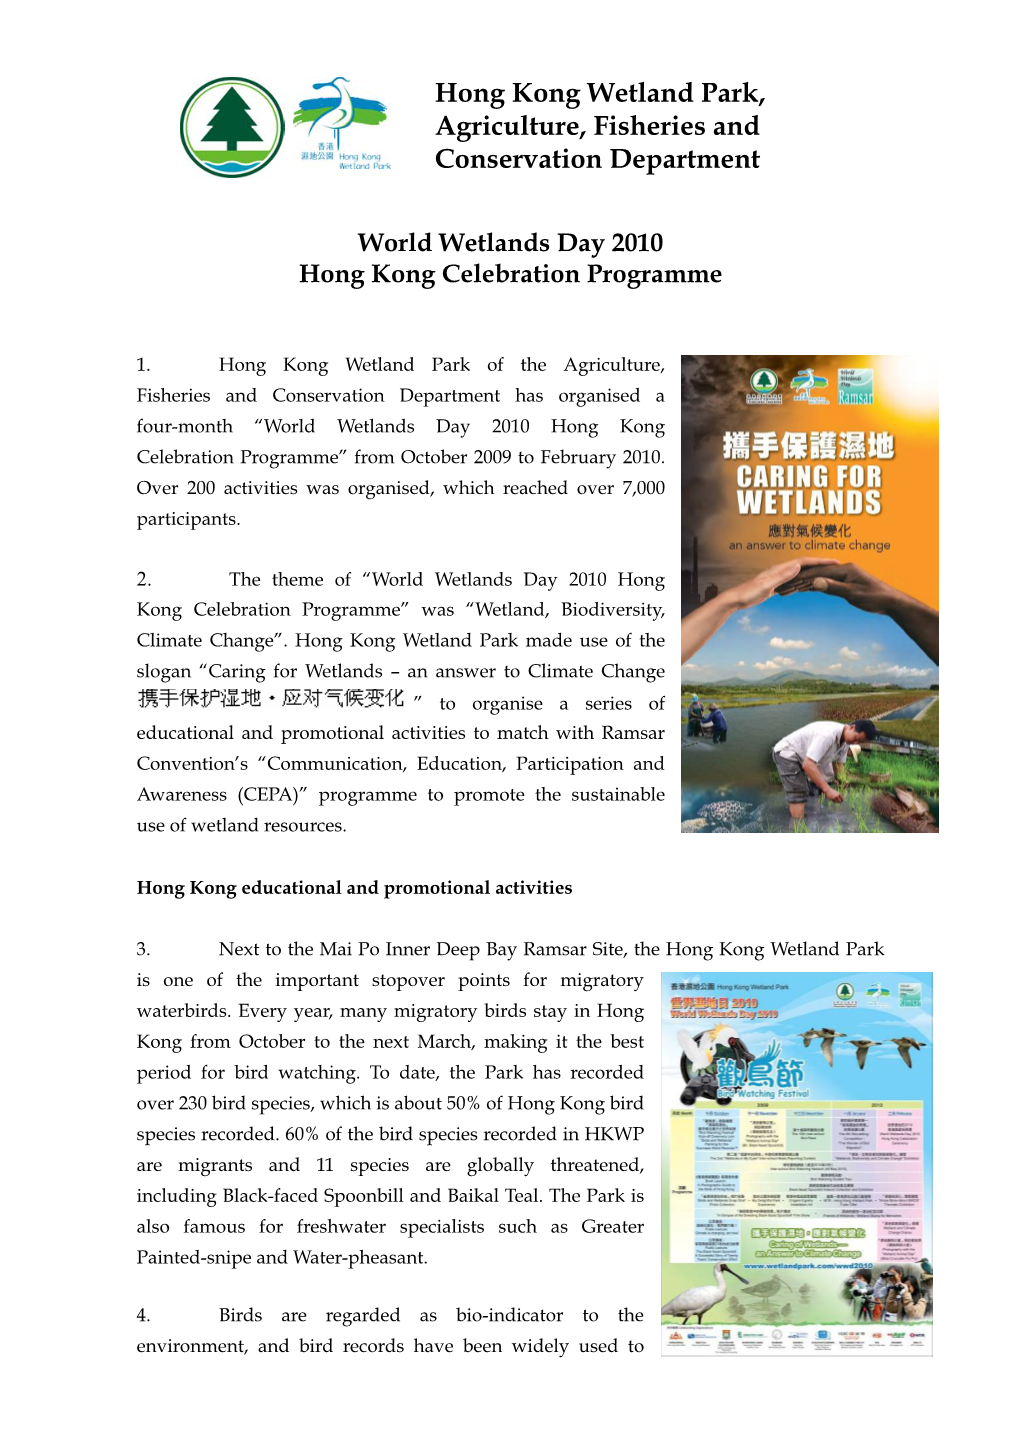 Hong Kong Wetland Park, Agriculture, Fisheries and Conservation Department